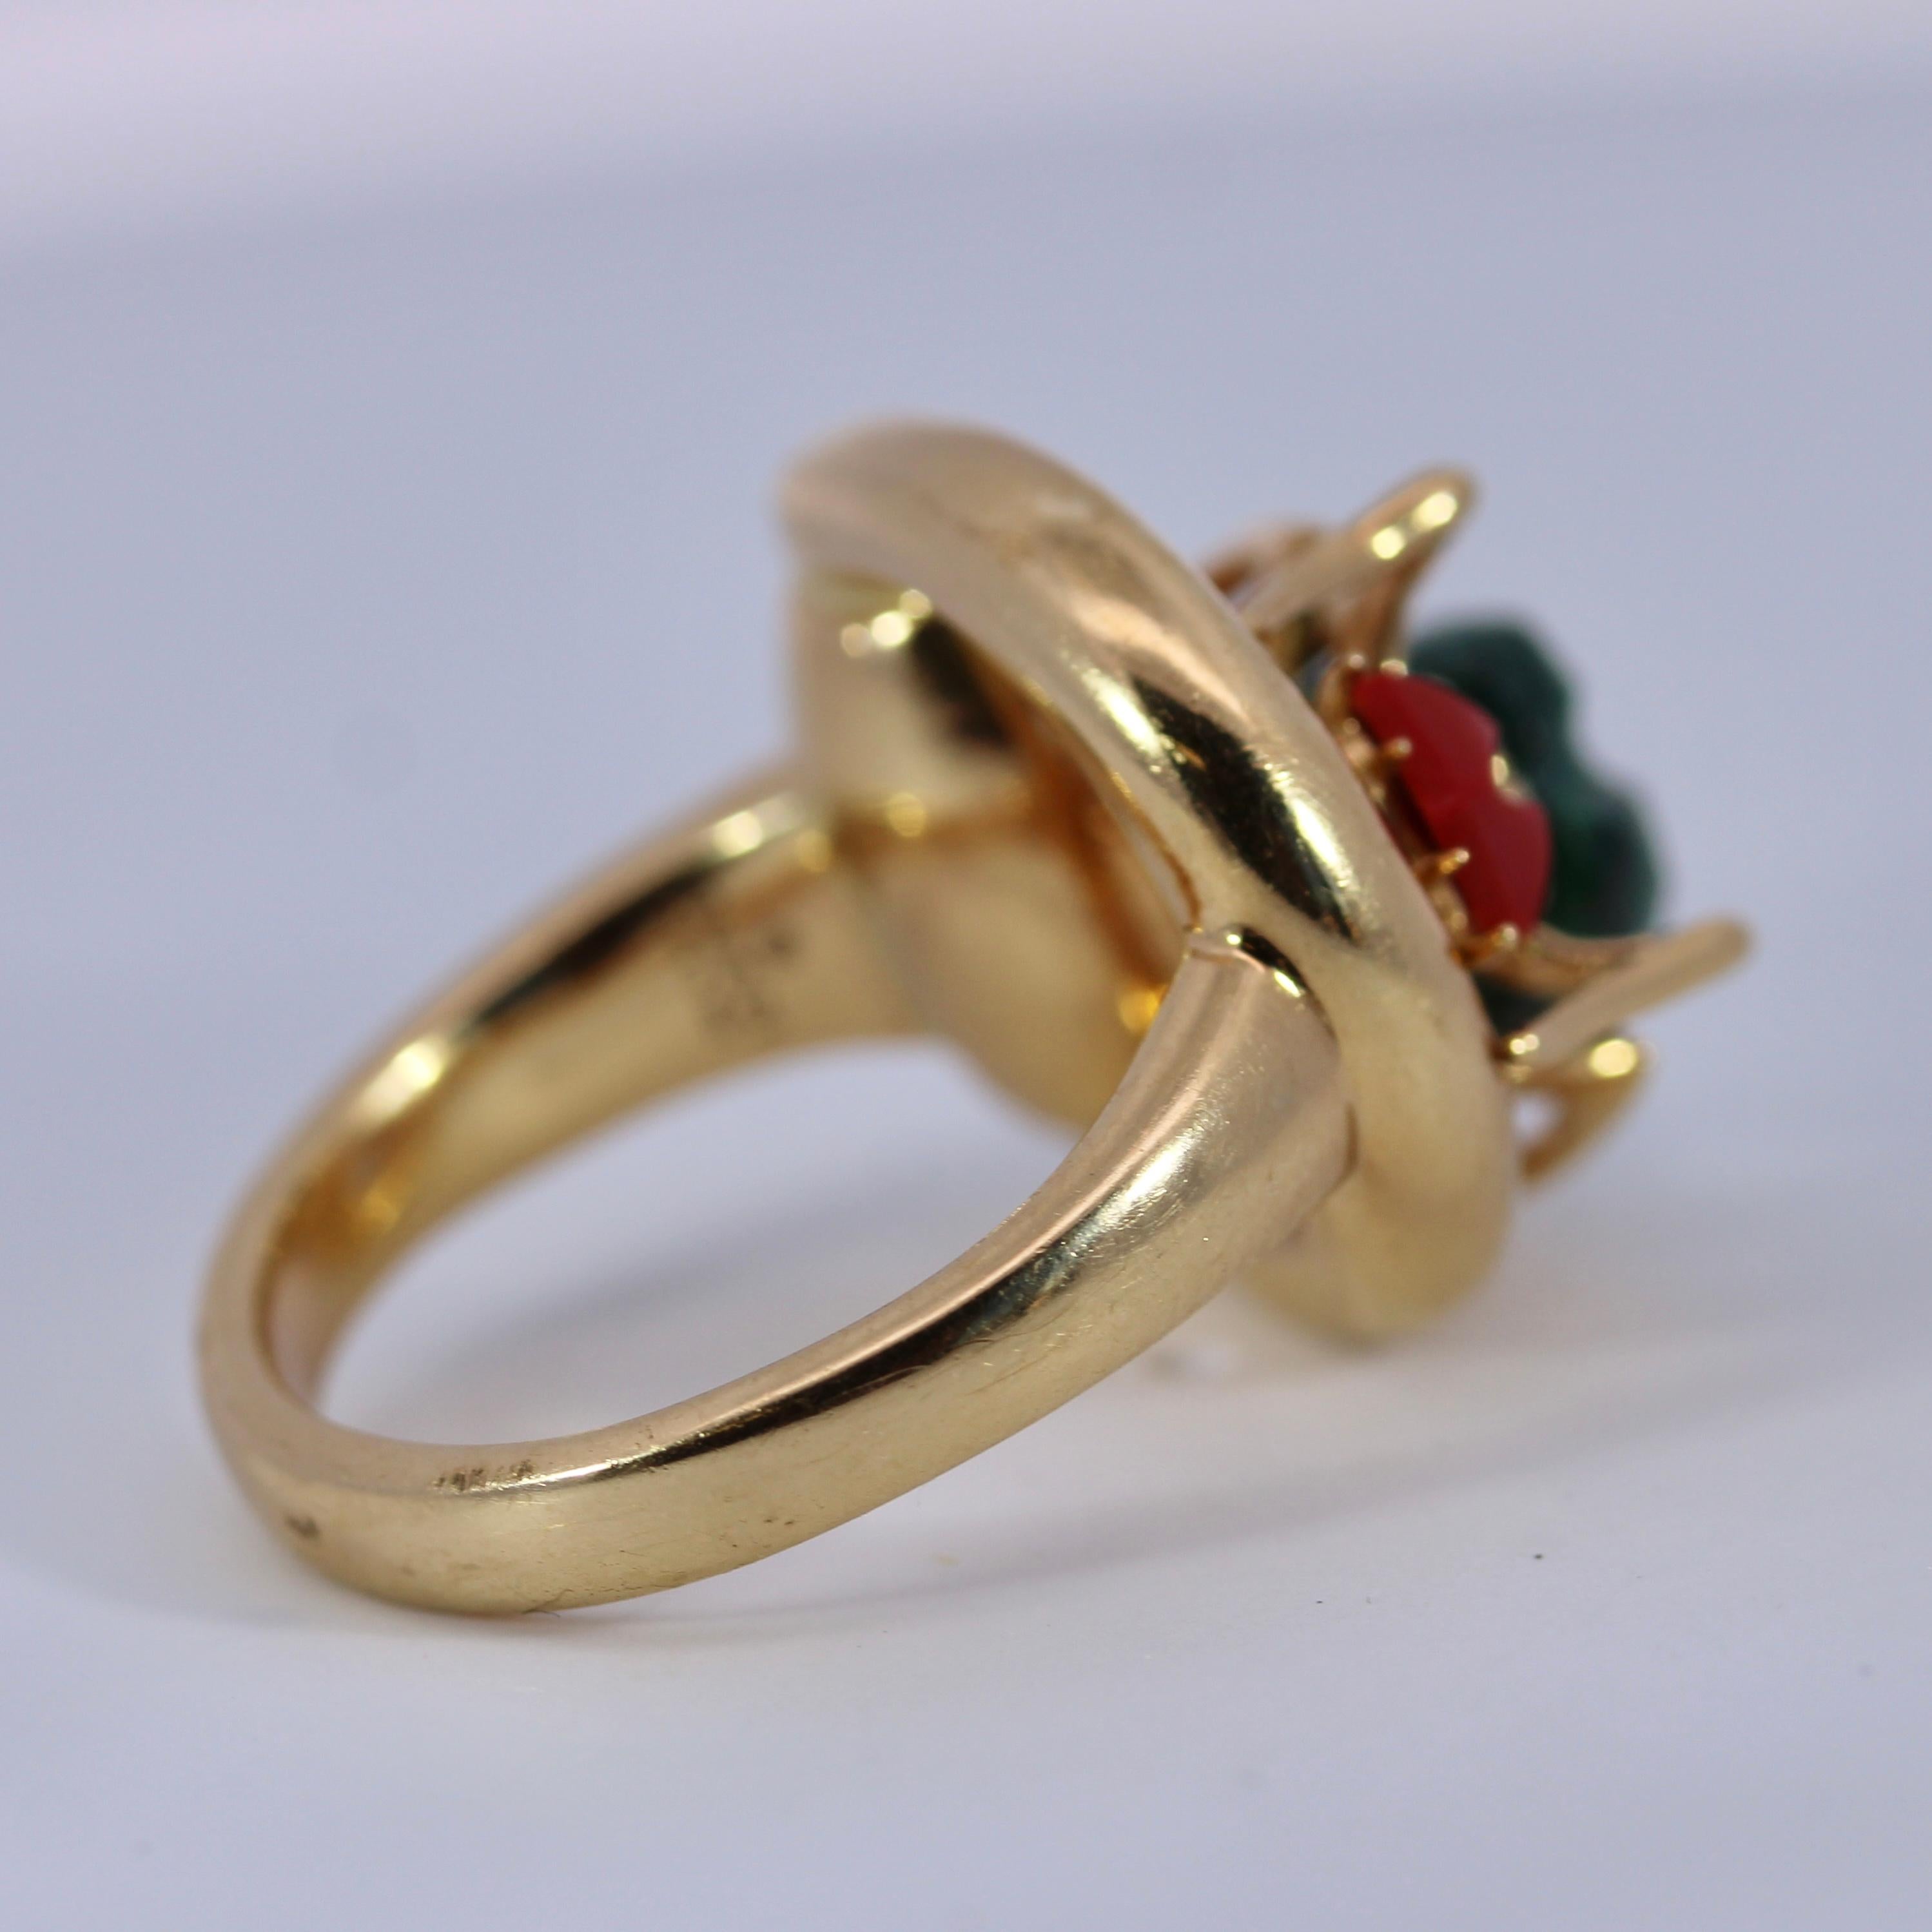 Women's Gucci Milano 18K Yellow Gold Beetle Ring With Diamonds, Coral And Malachi